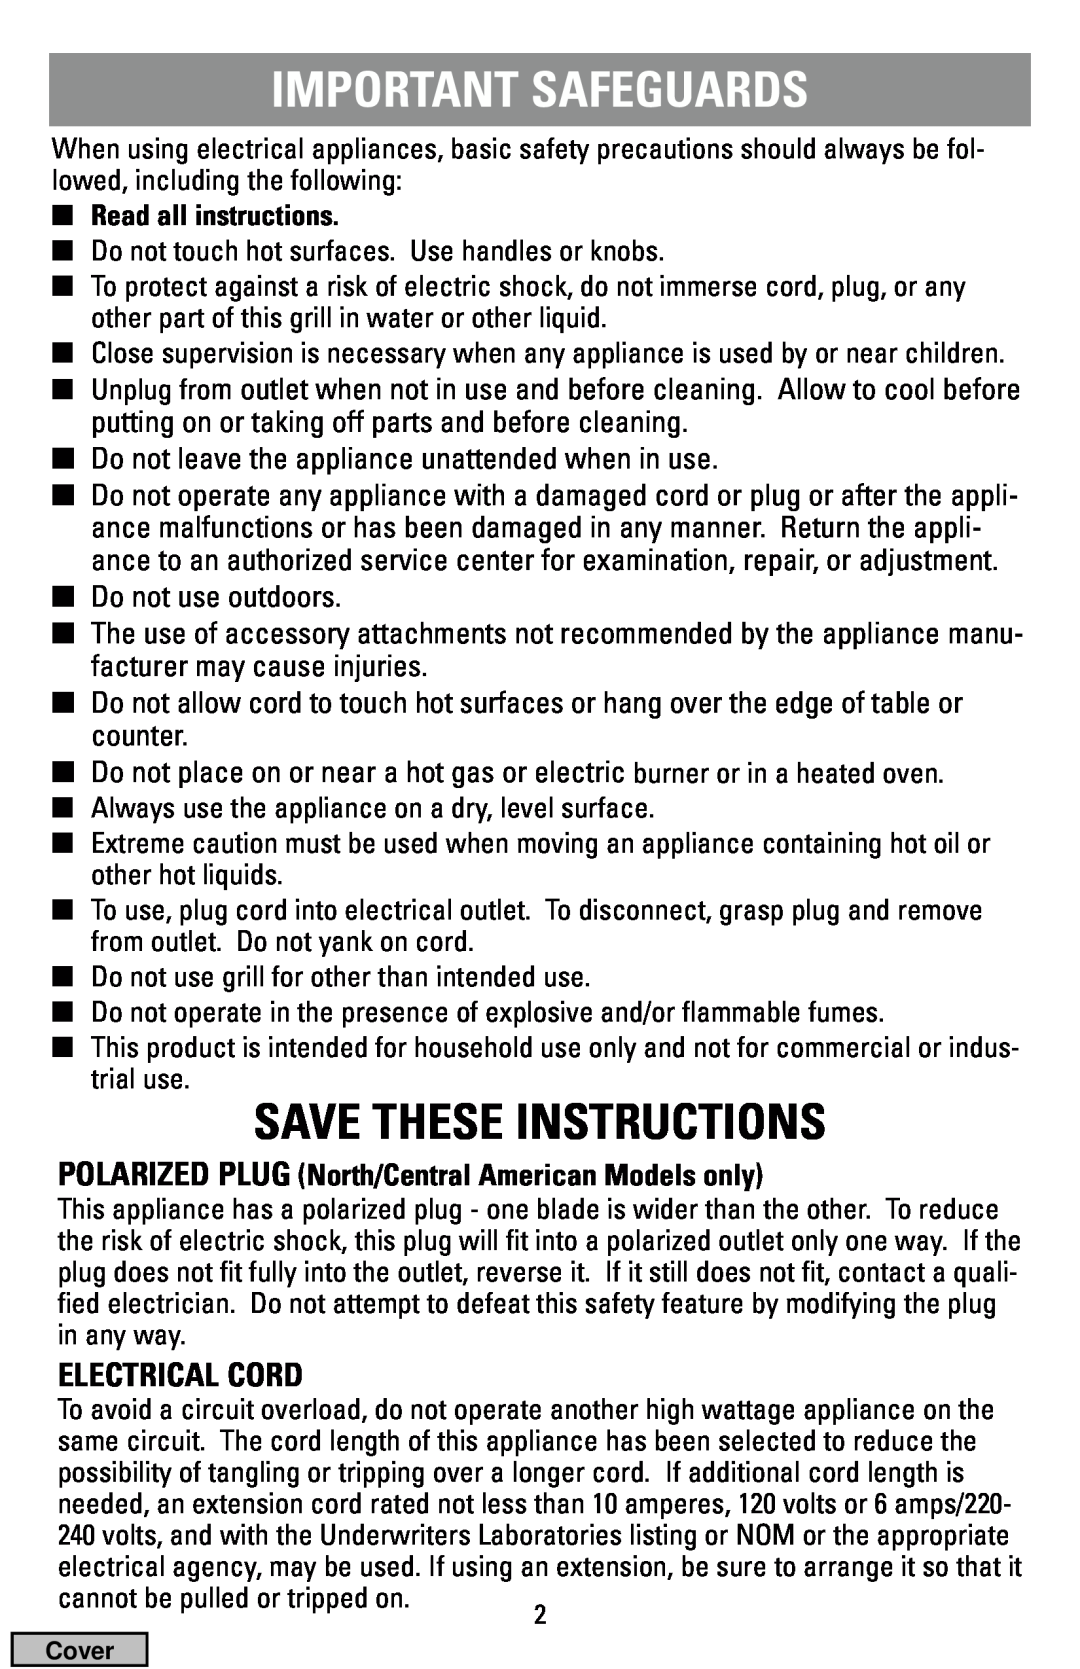 Black & Decker IG100 manual Important Safeguards, Save These Instructions, Electrical Cord 